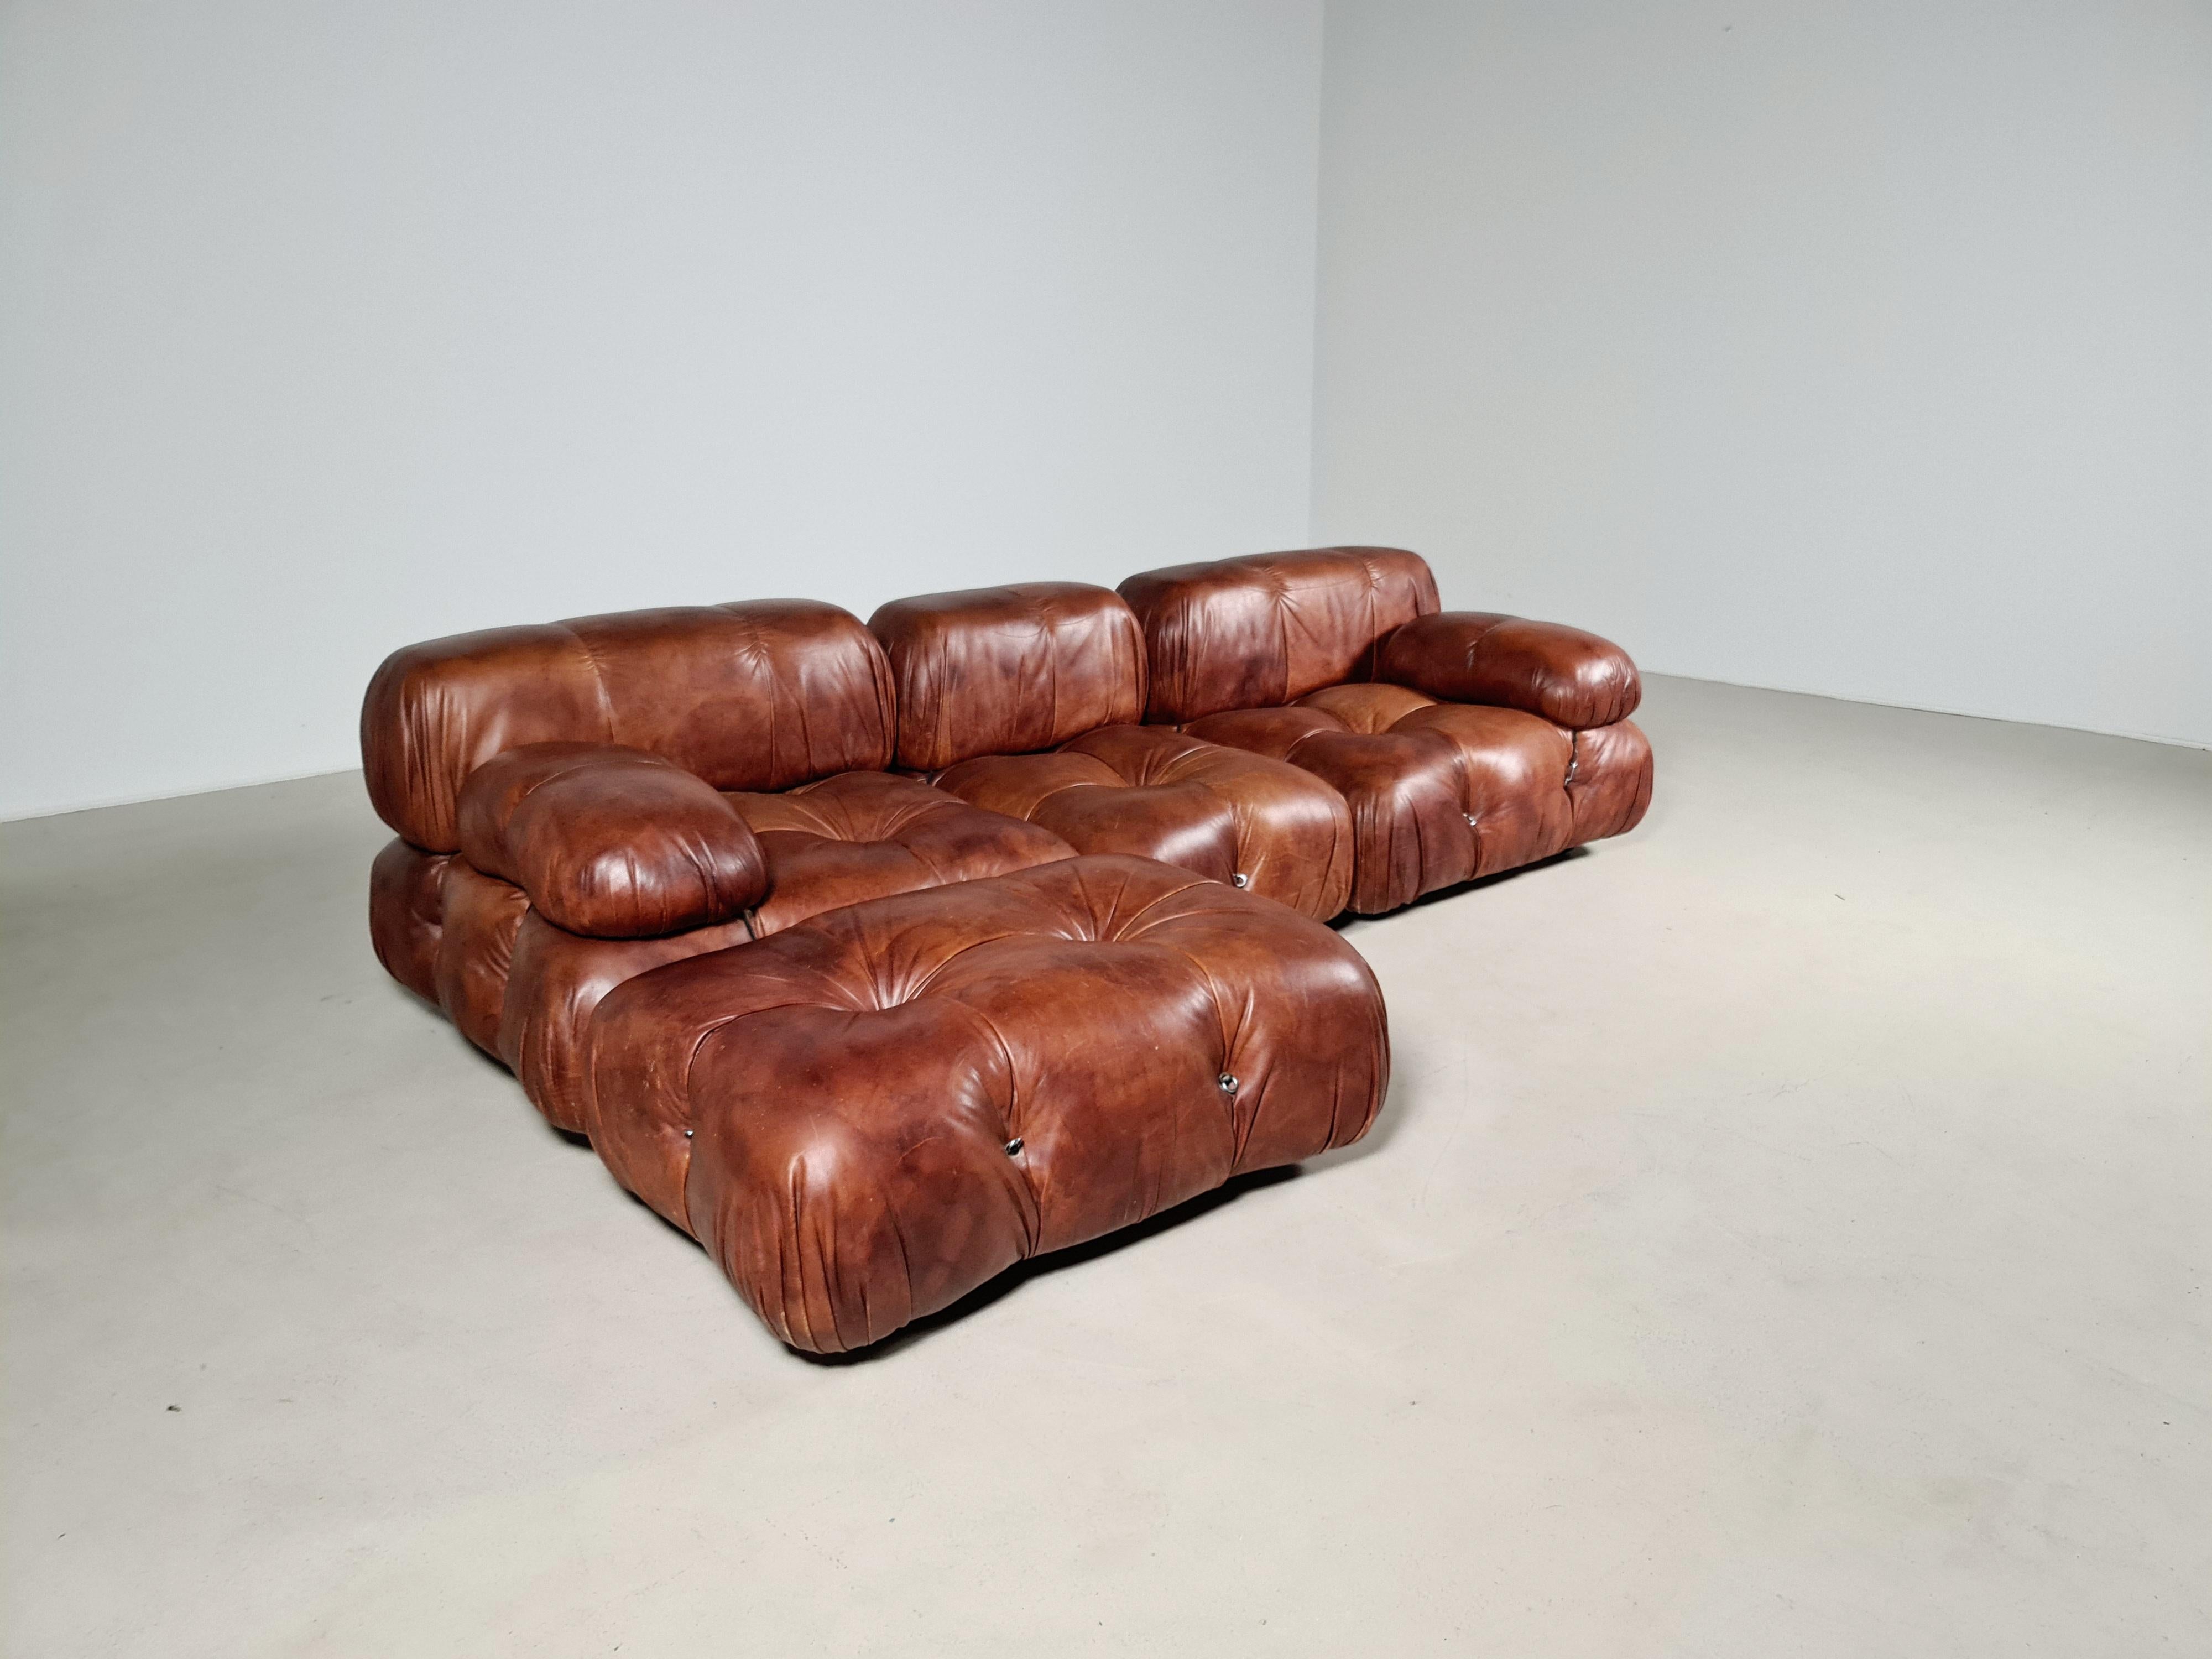 The sectional elements of this sofa can be used freely and apart from one another. Because the sofa is modular and backs and armrests are provided with rings and carabiners, you can create many different settings. 
The leather aged perfectly over